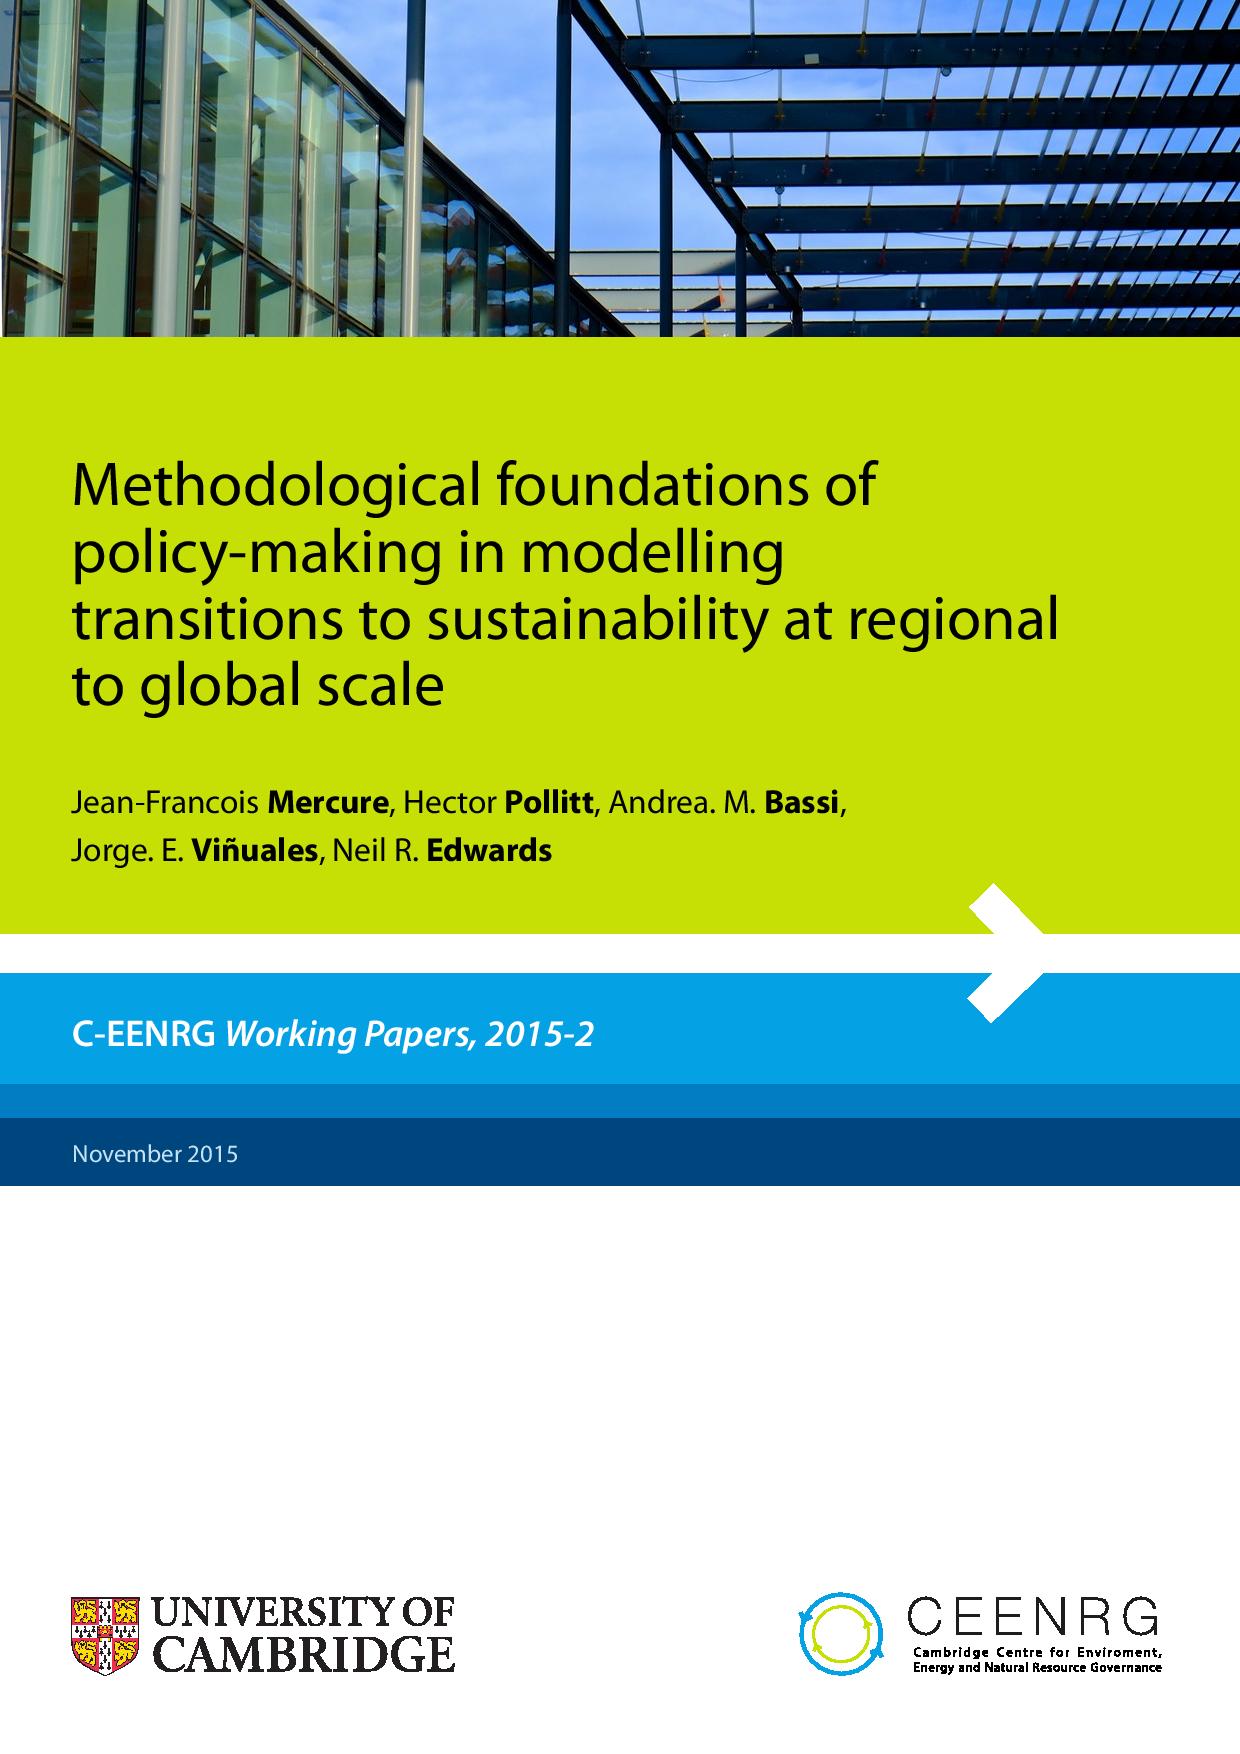 C EENRG WP 2 Policy making modelling transitions page 001